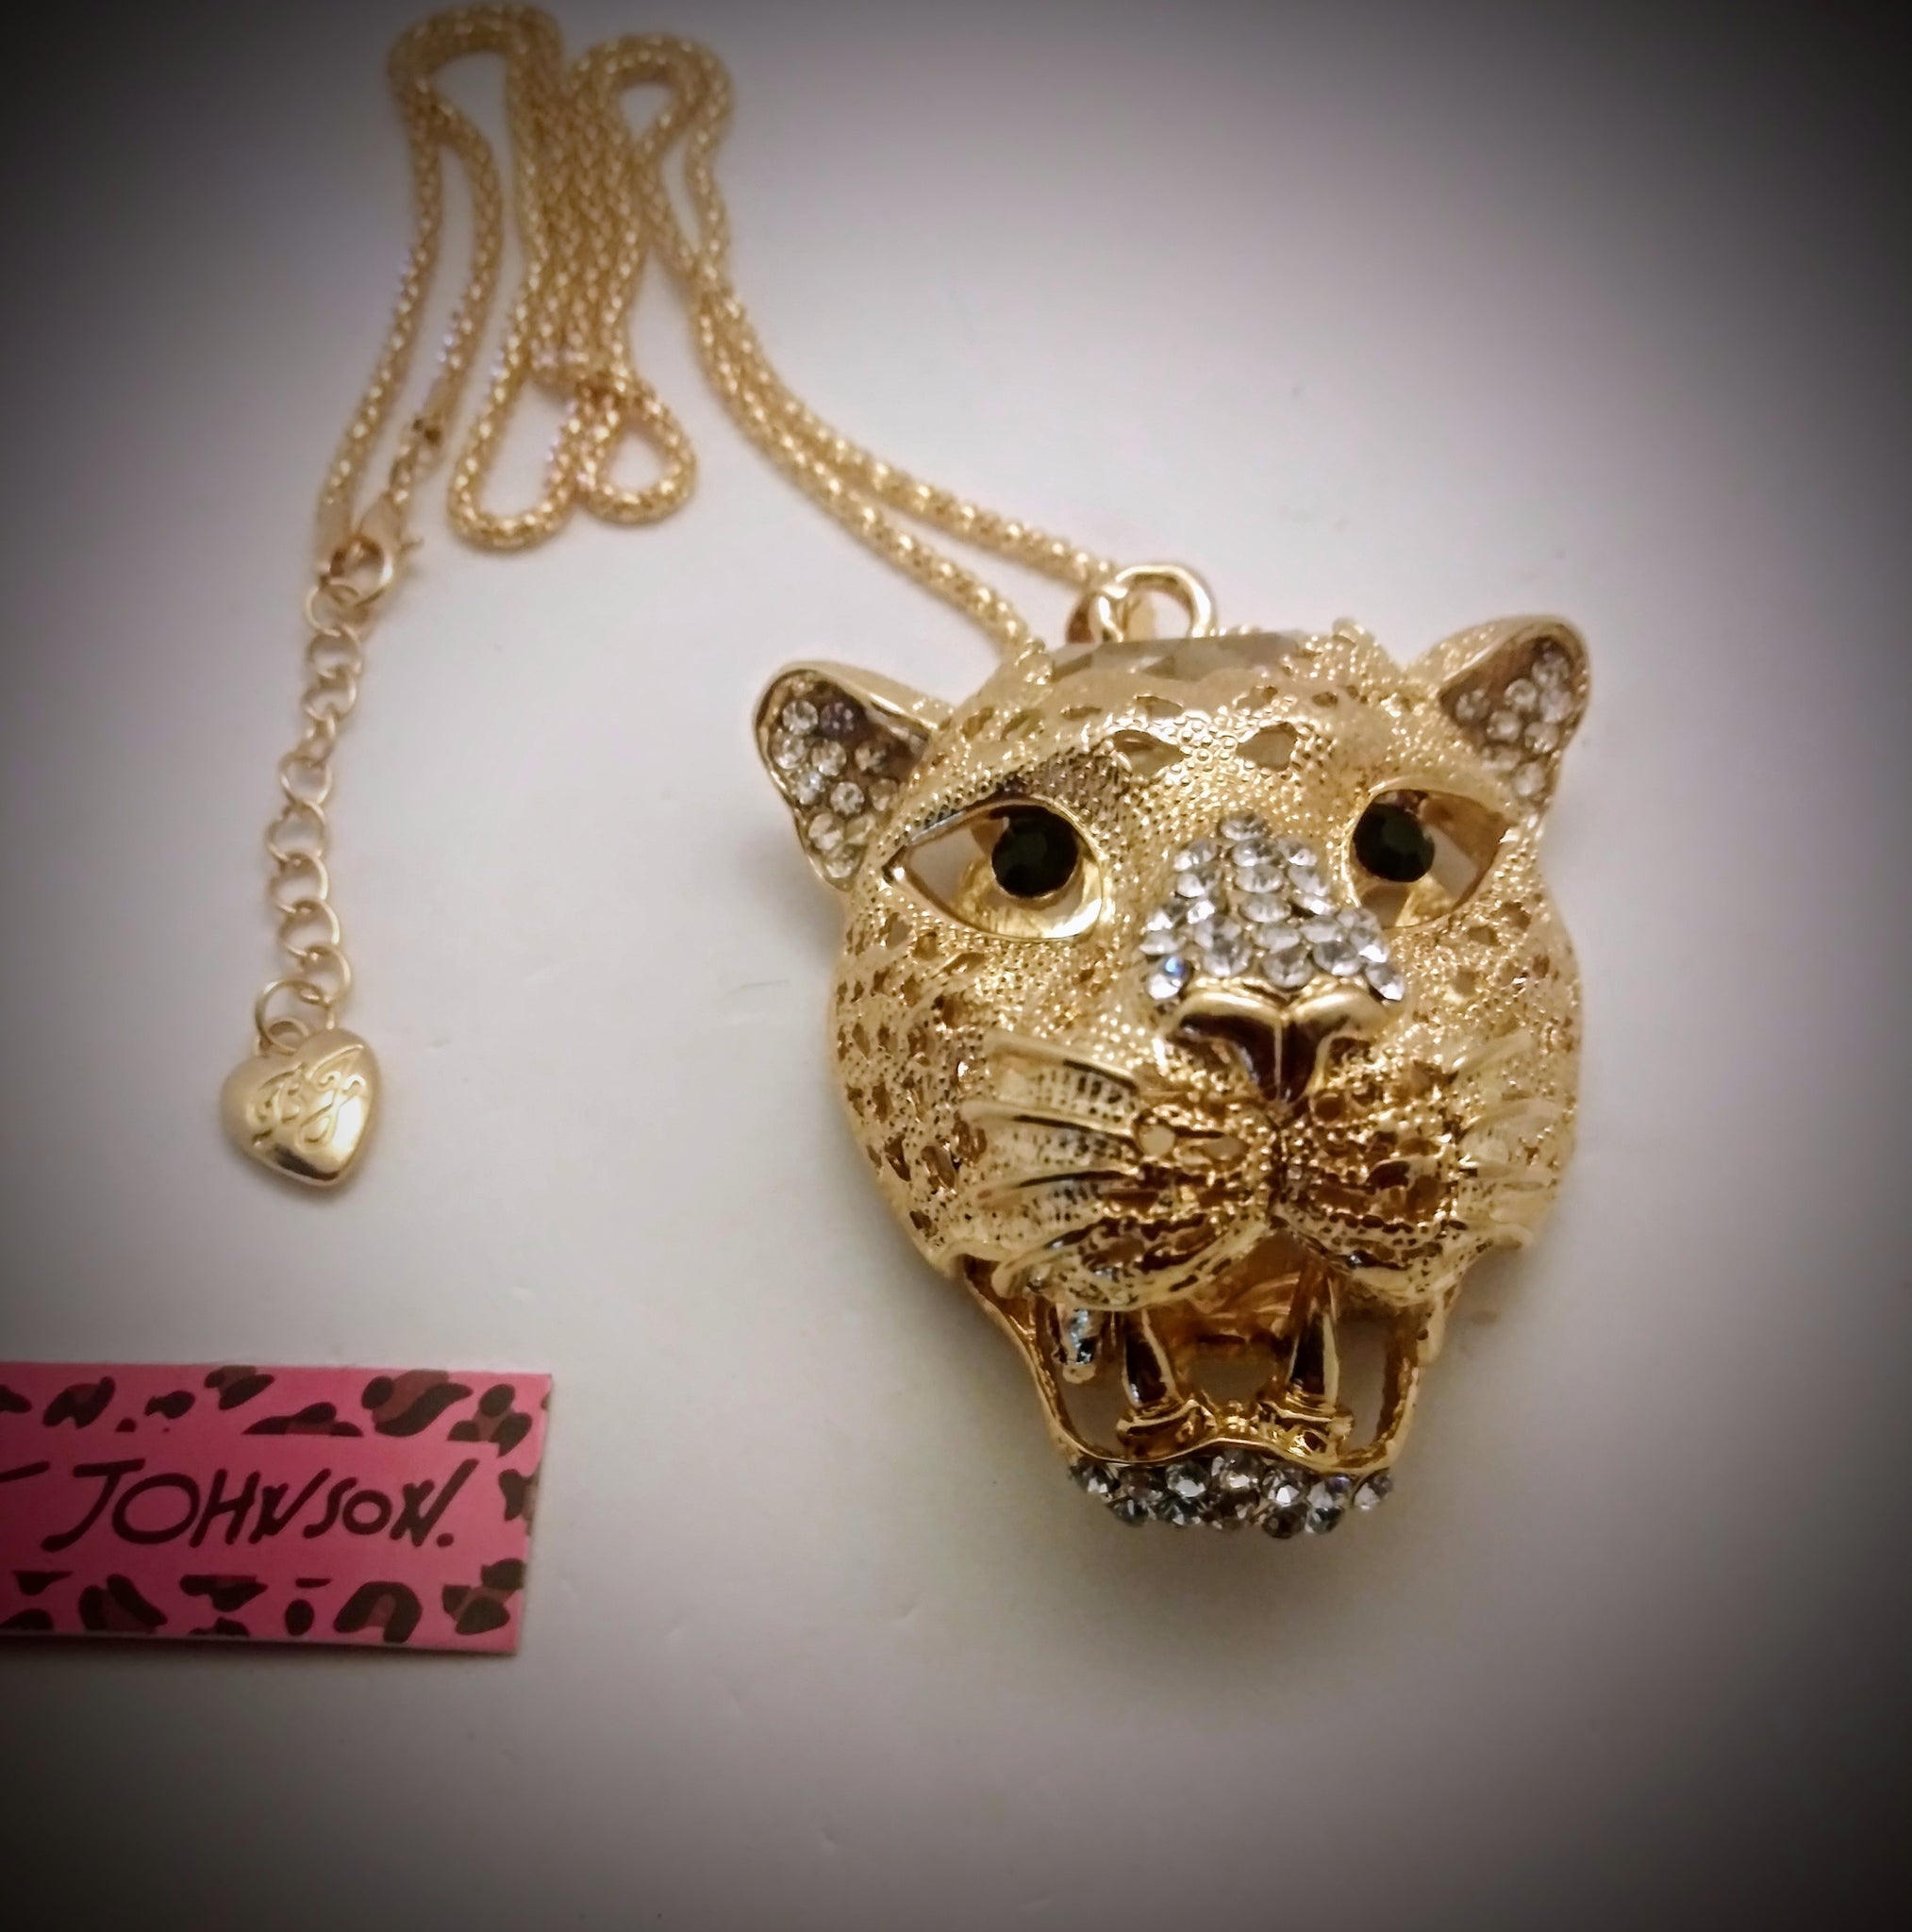 BETSEY
JOHNSON BEAUTIFUL CRYSTAL WITH SILVER OR GOLD 3D PANTHER/CAT PENDANT